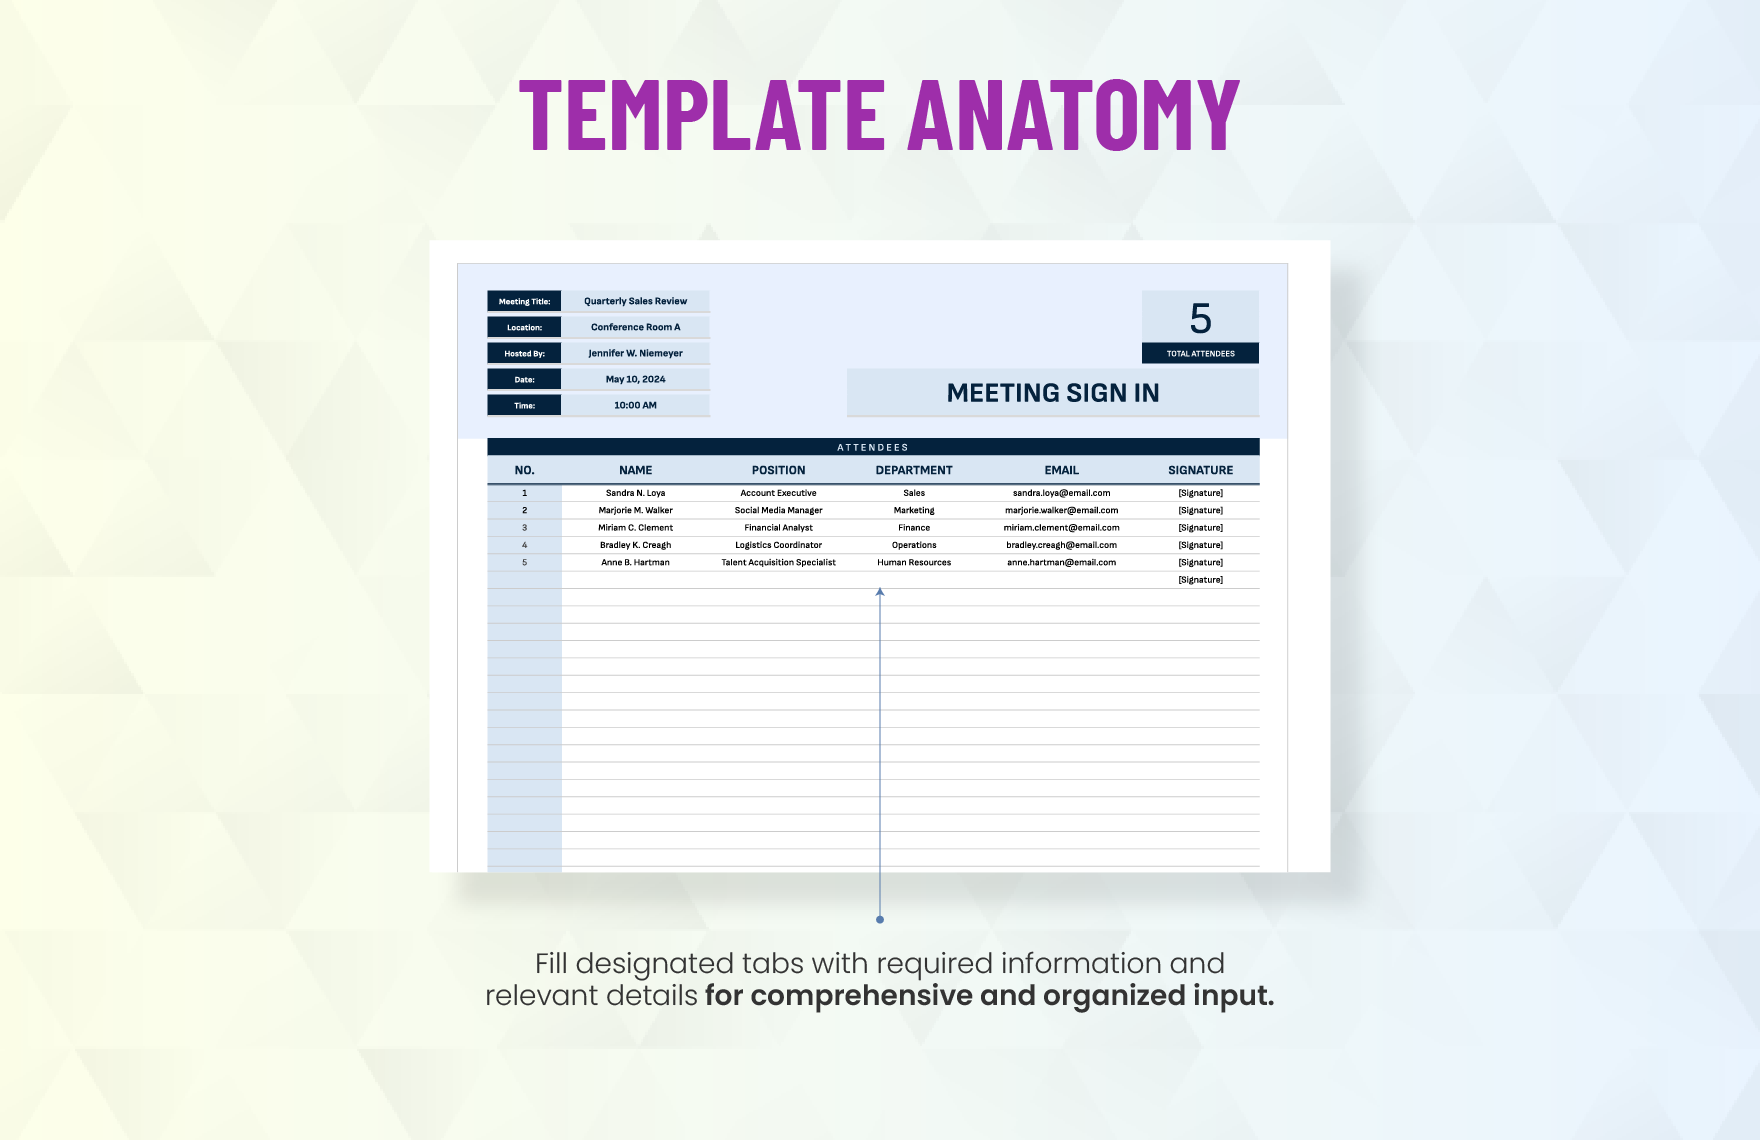 Office Meeting Sign in Sheet Template